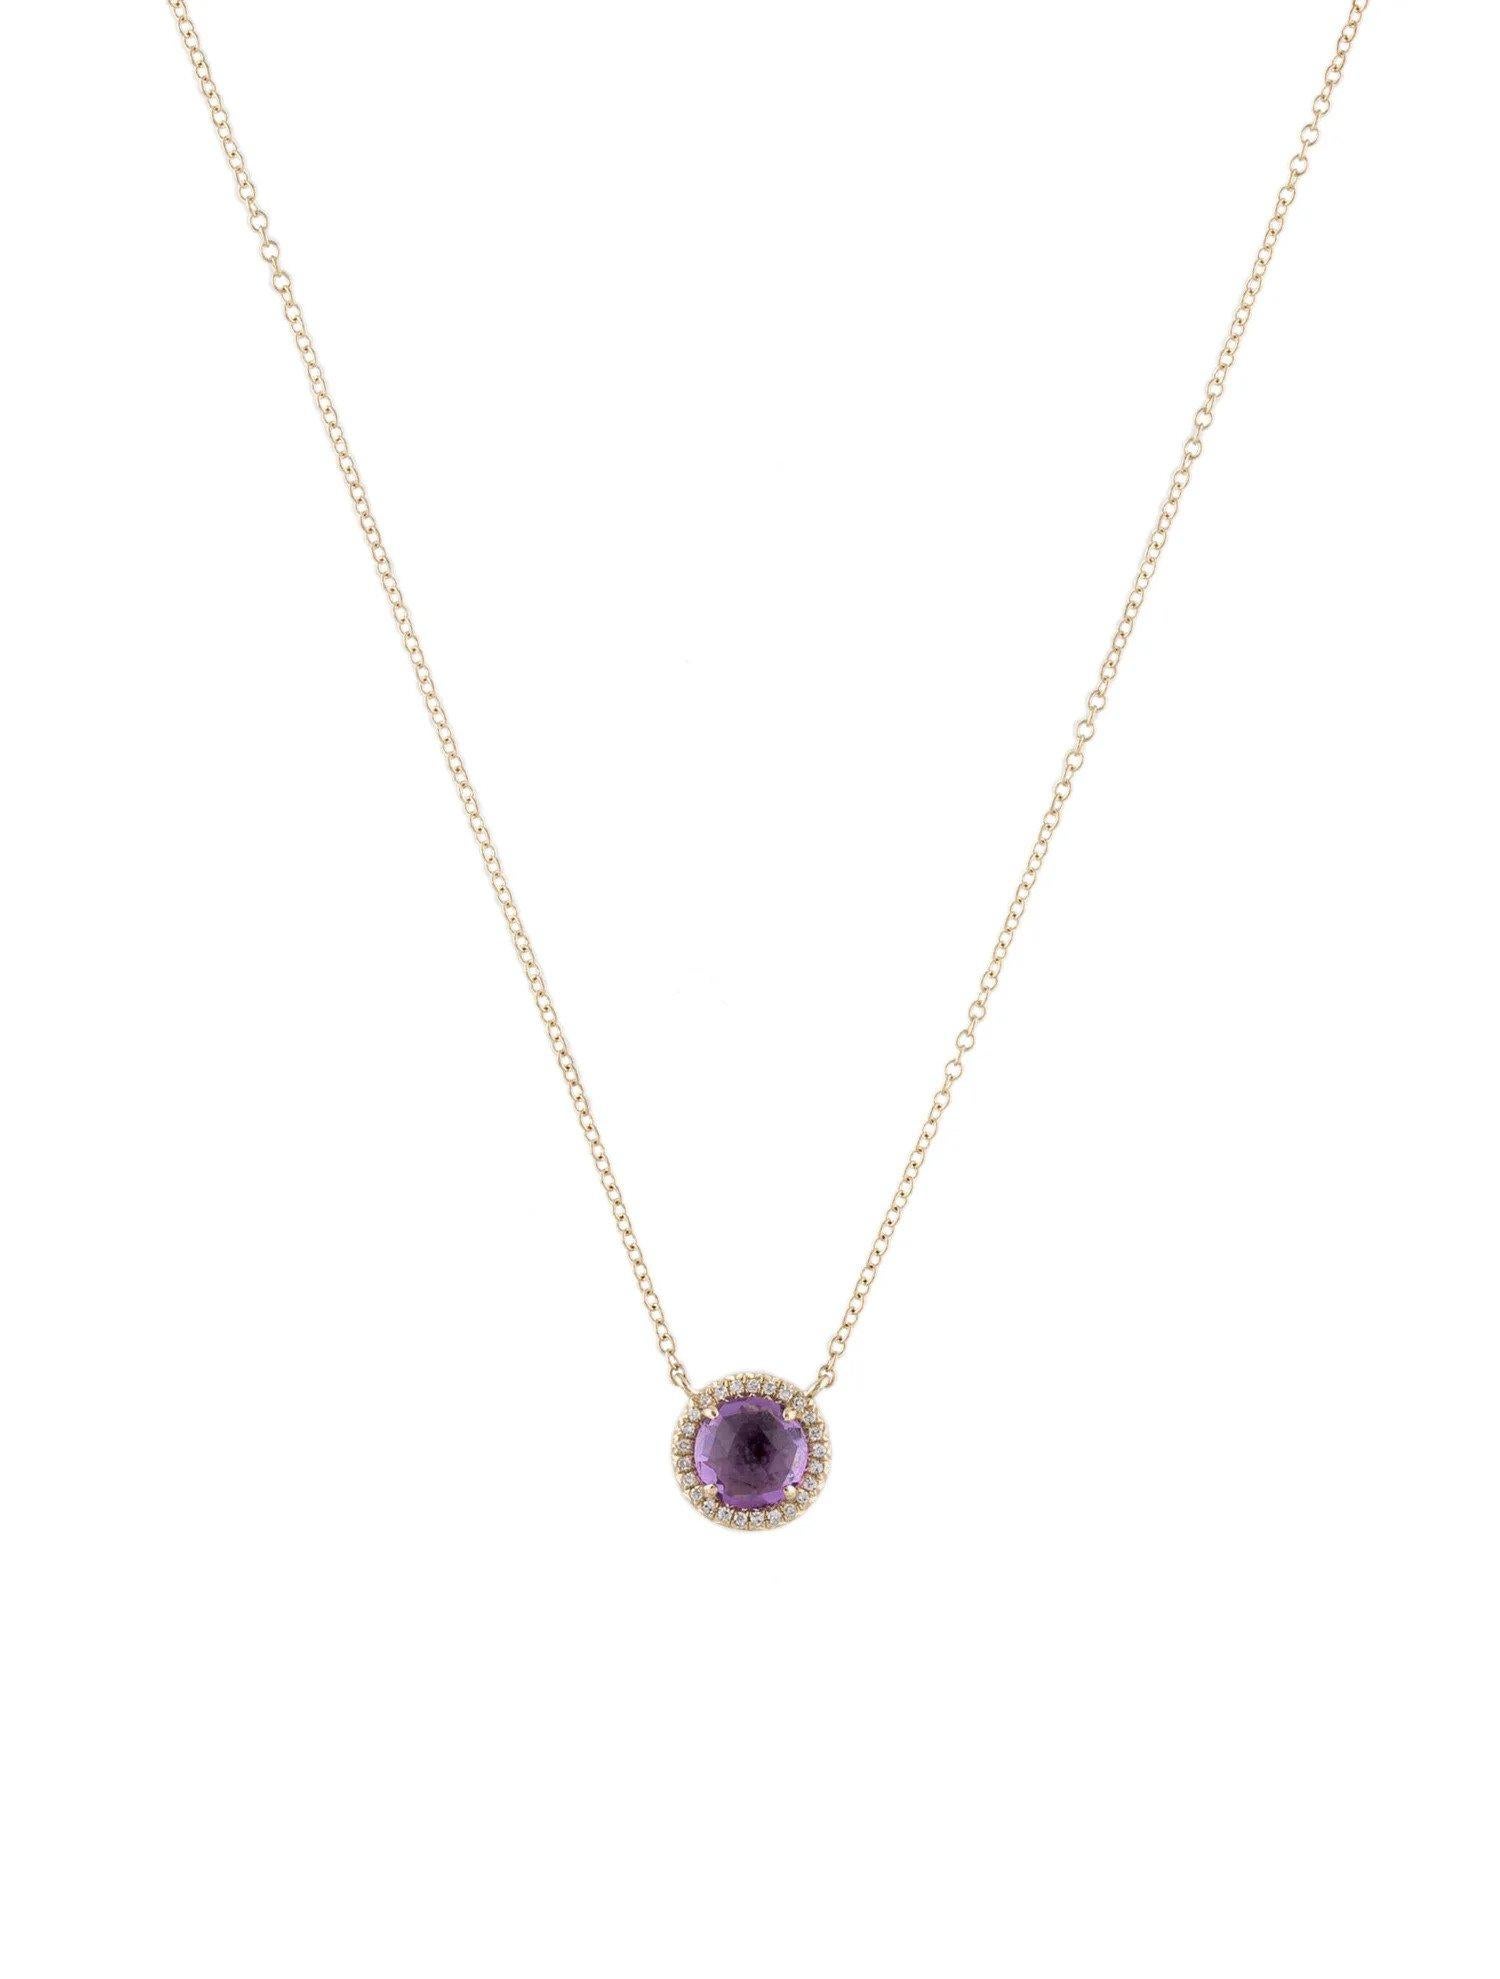 Round Cut 0.95 Carat Round Amethyst & Diamond Yellow Gold Pendant Necklace  For Sale